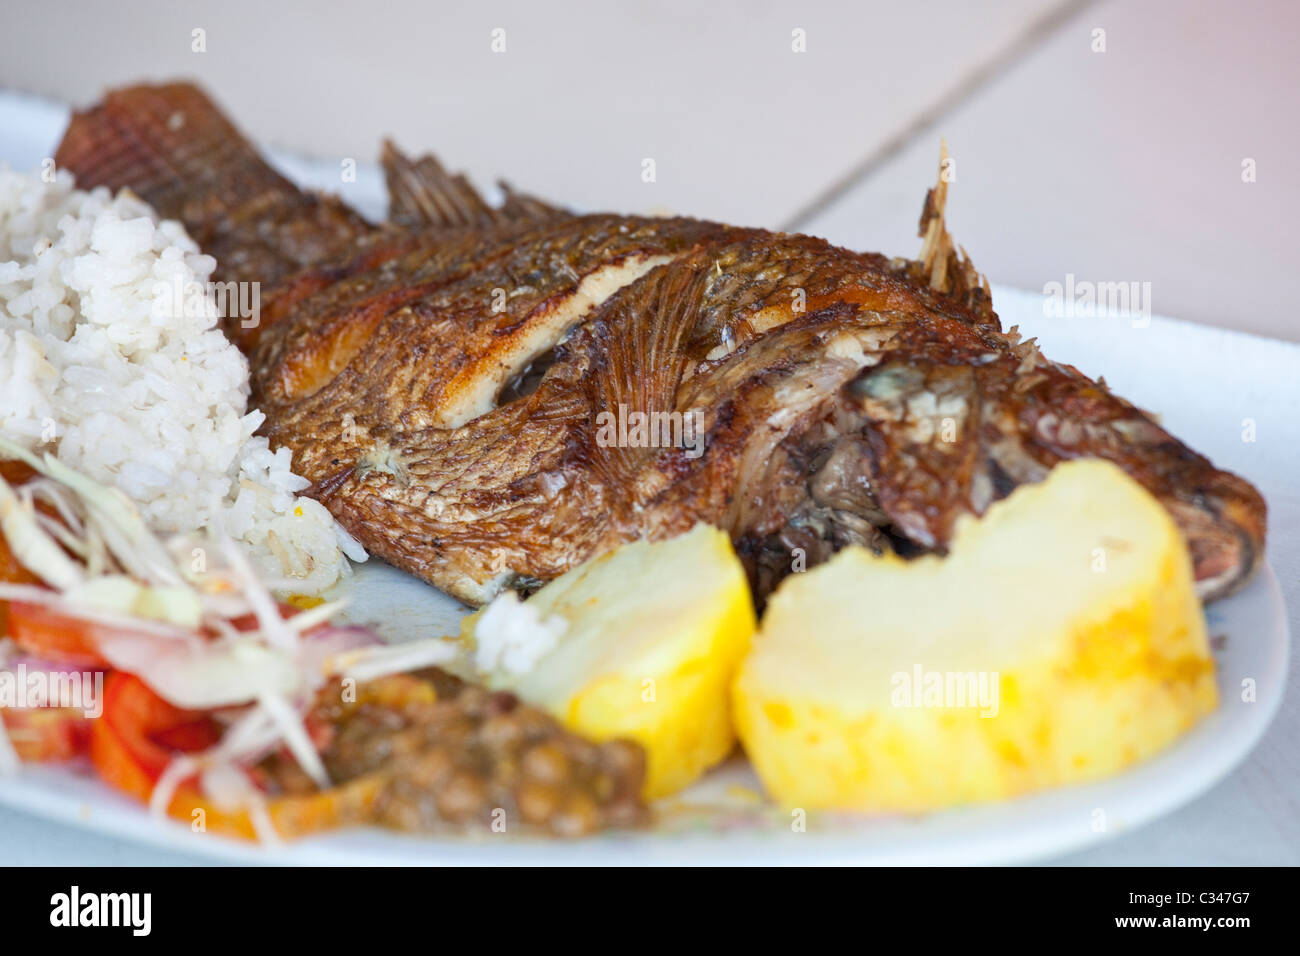 Fried fish, Barranquilla, Colombia Stock Photo